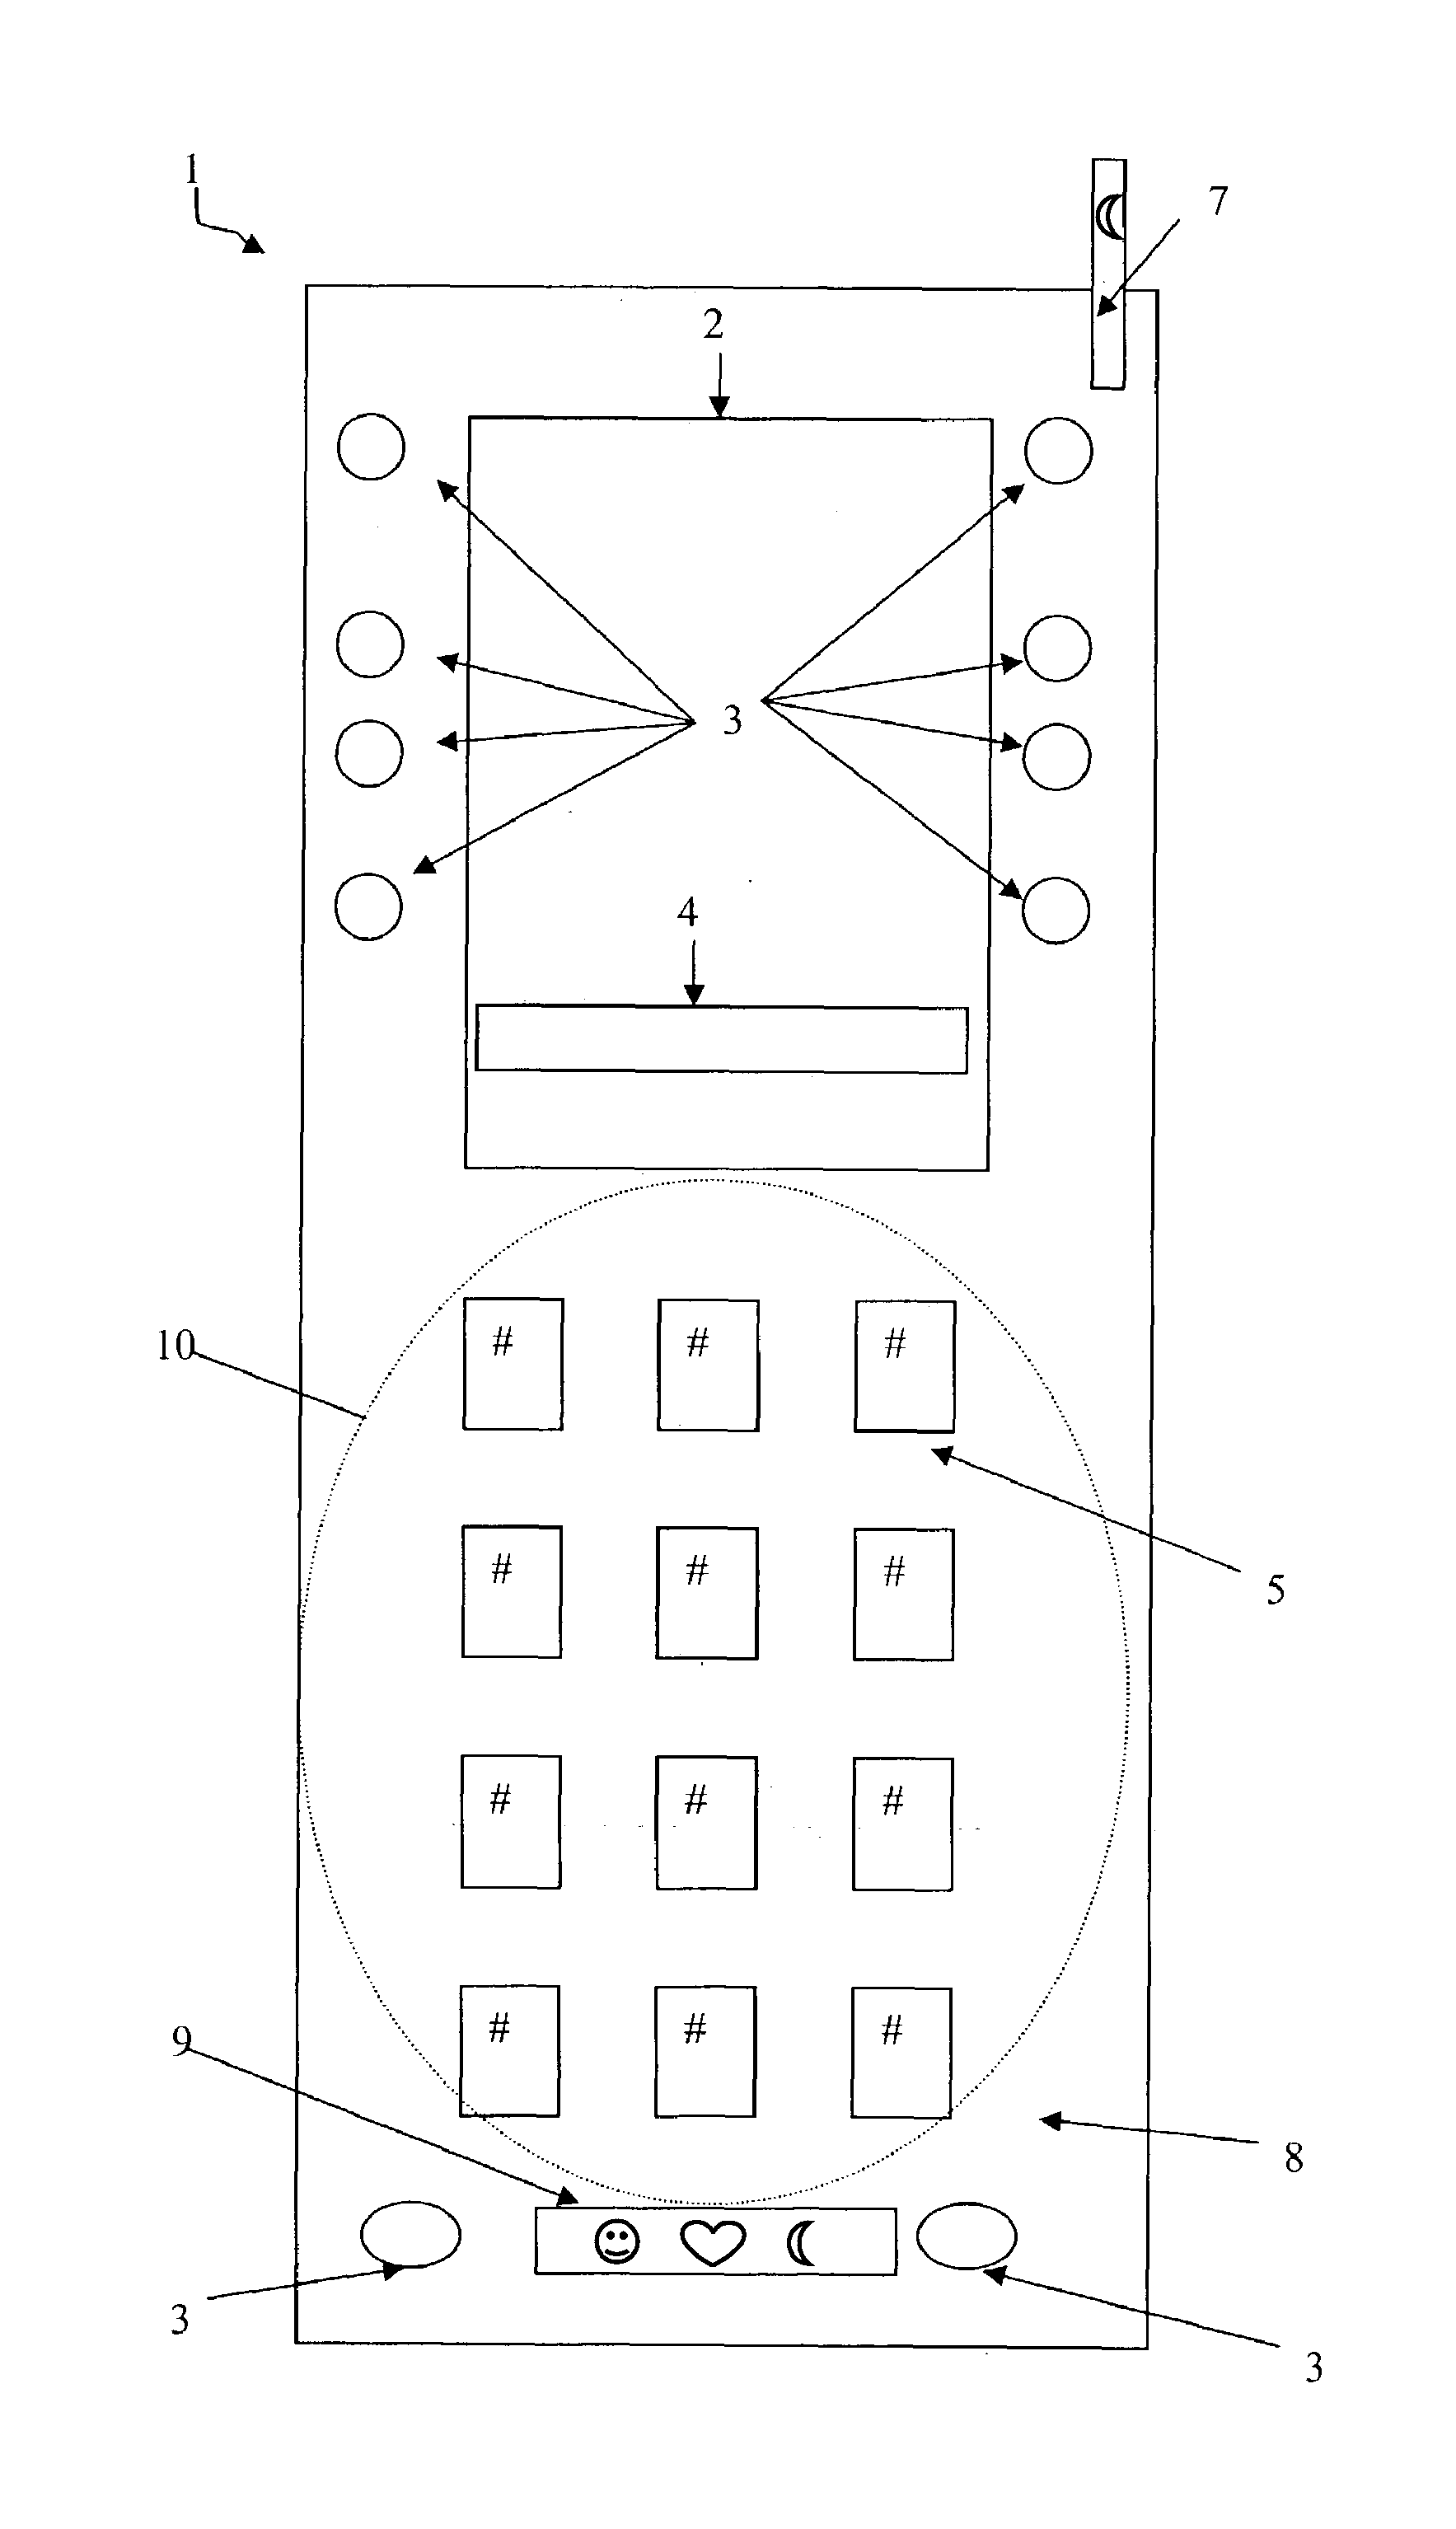 Functional identifiers on wireless devices for gaming/wagering/lottery applications and methods of using same